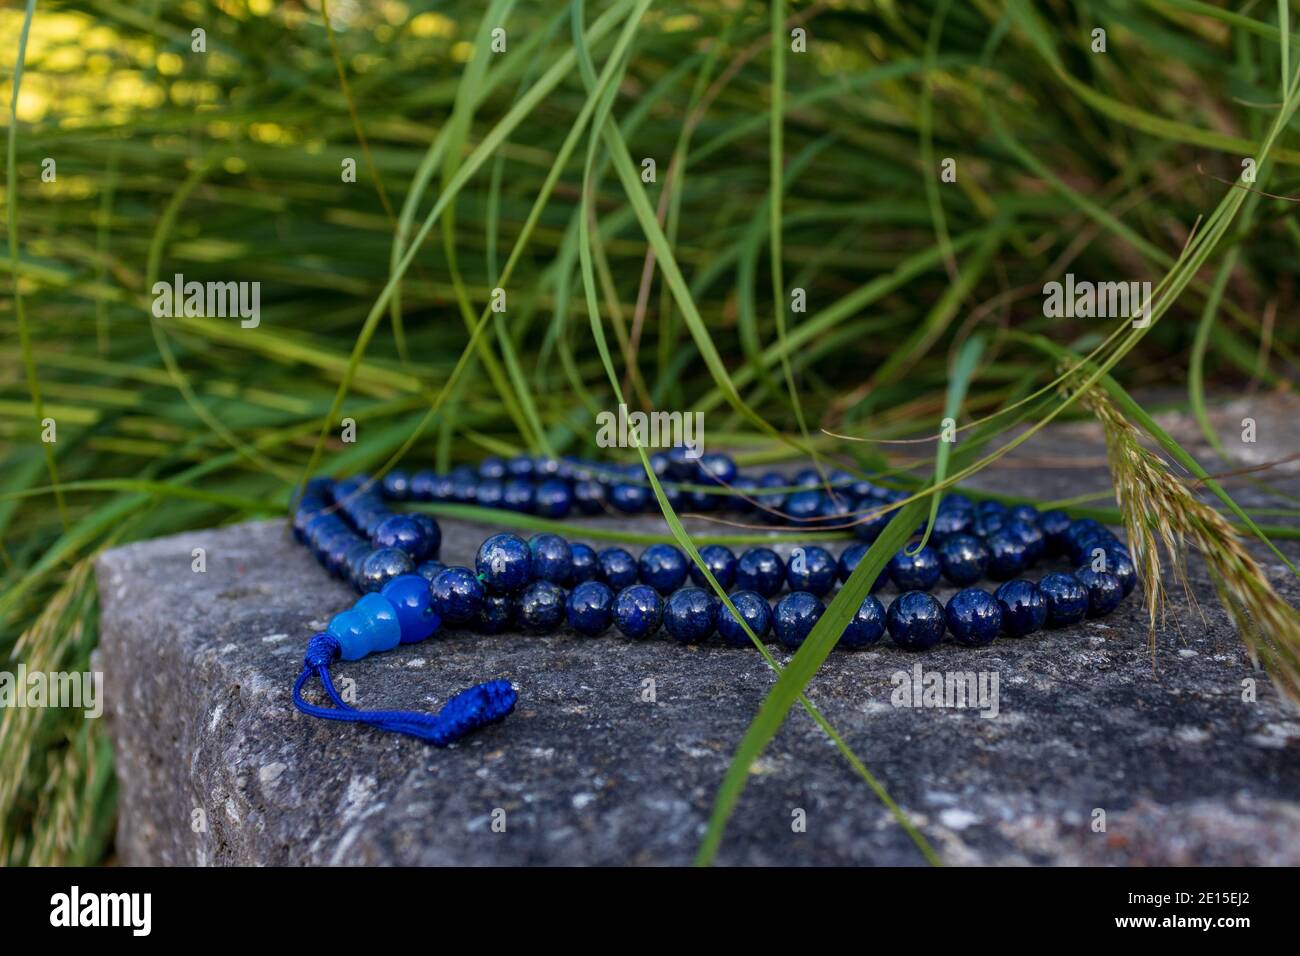 Close up of buddhist prayer beads (Mala) on stone with green grass in the background. Mantra meditation in nature. Stock Photo